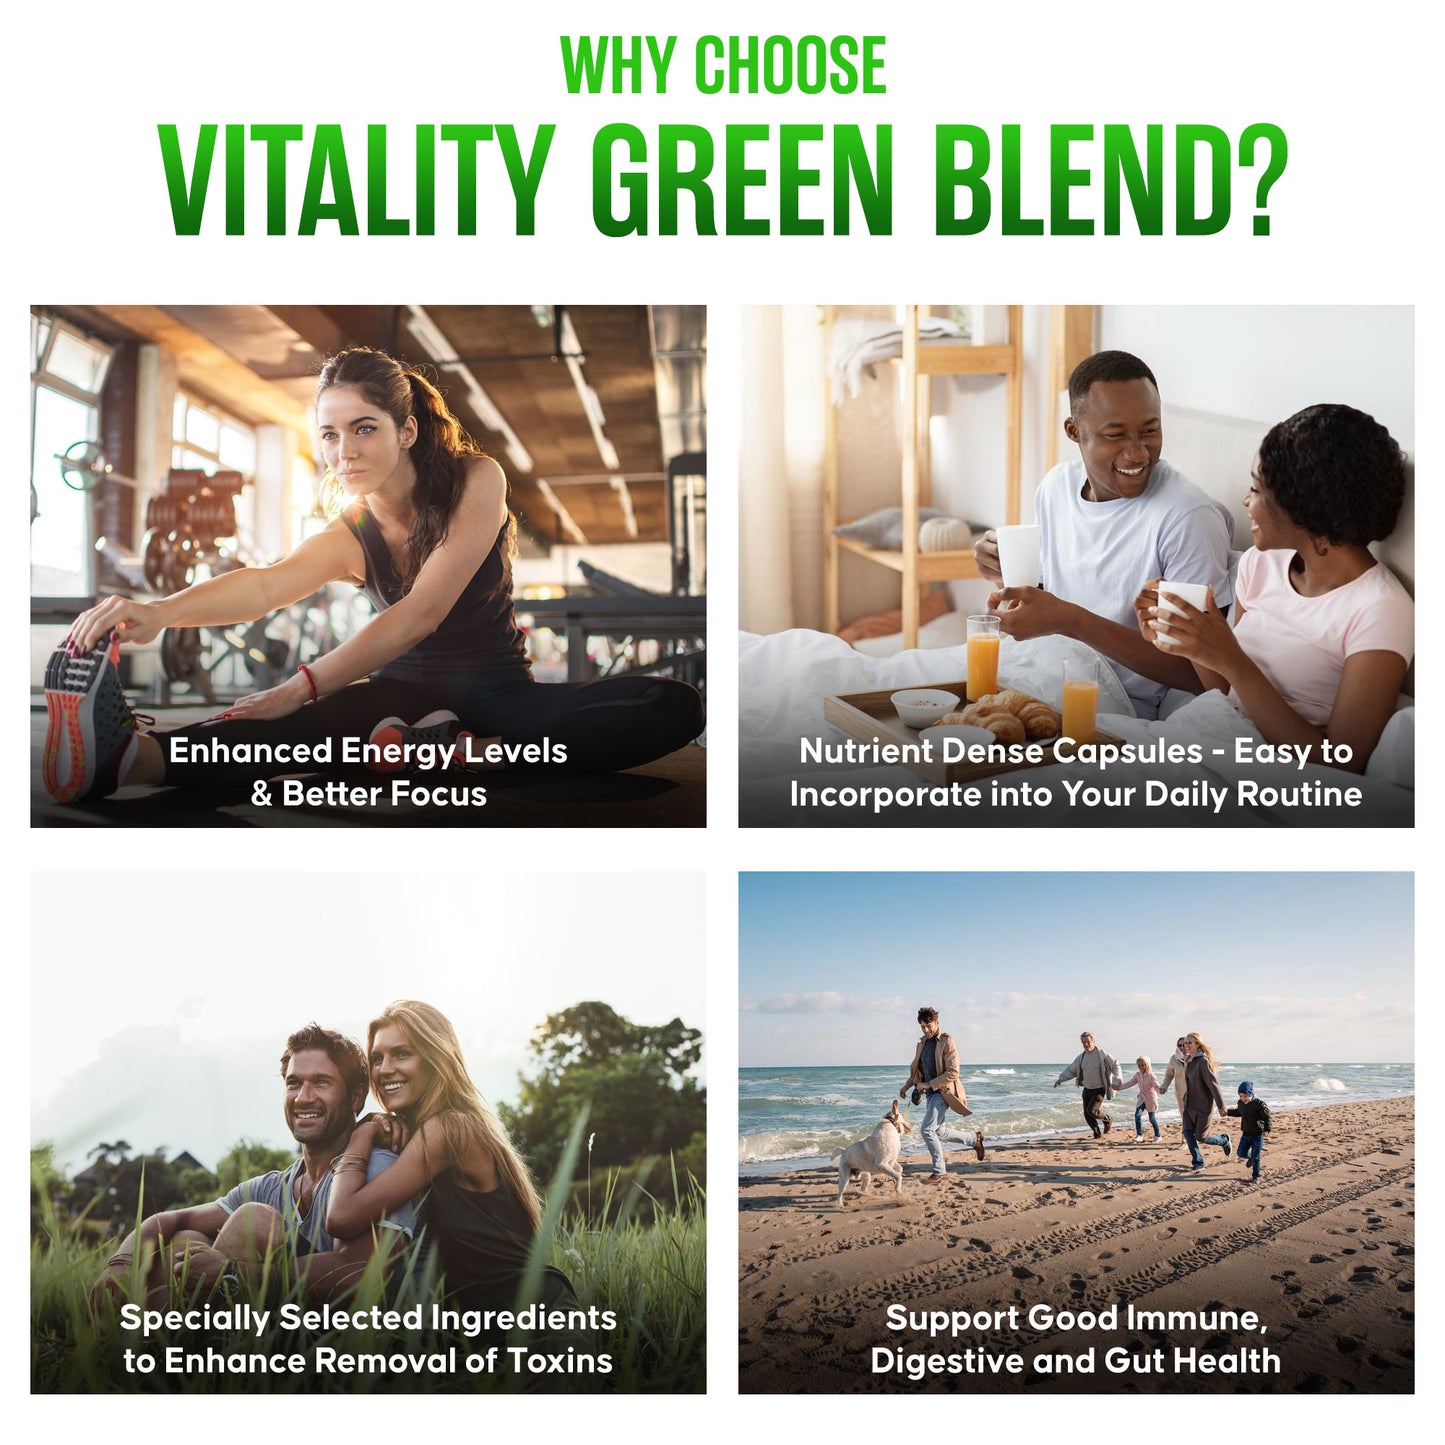 
                  
                    The promotional collage for "Vitality Green Blend" showcases a quartet of vibrant lifestyle images, underscoring the product's myriad of benefits: from bolstering energy levels and focus during fitness activities, to seamlessly integrating nutrient-rich capsules into everyday health routines, enhancing detox processes, and reinforcing immune, digestive, and gut health for a balanced life. The supplement is presented as a cornerstone for a healthy, active lifestyle.
                  
                